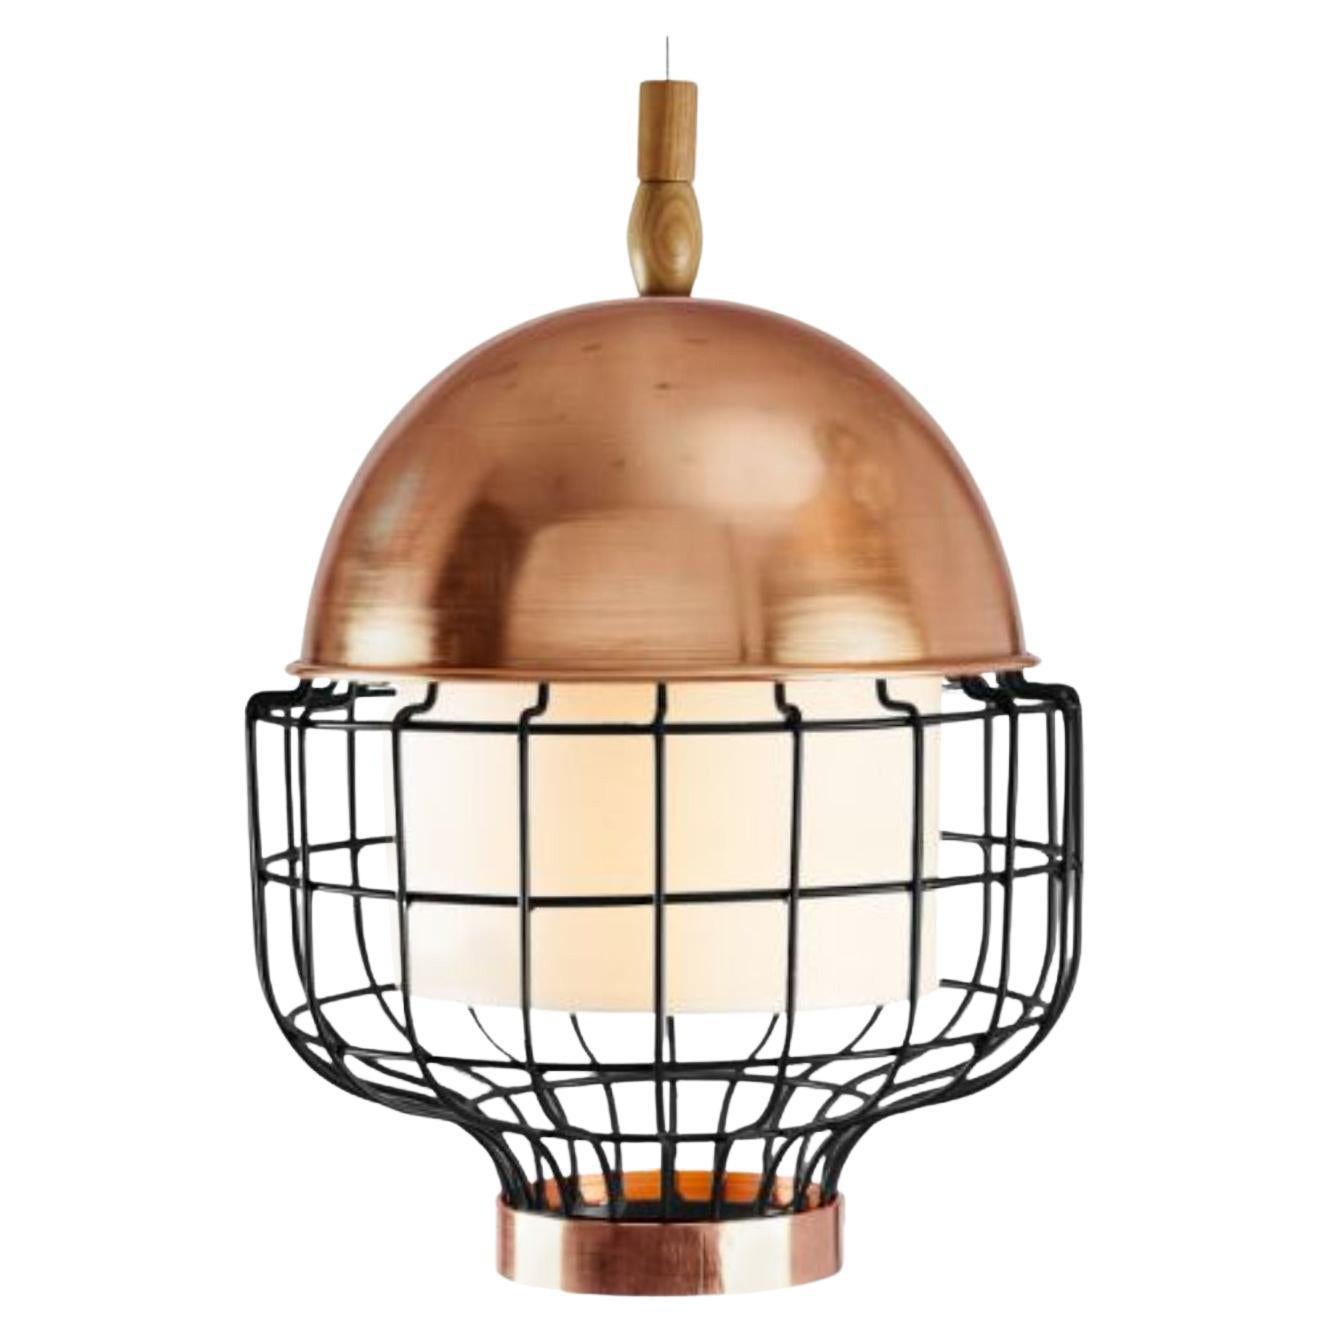 Copper Black Magnolia III Suspension Lamp with Copper Ring by Dooq For Sale